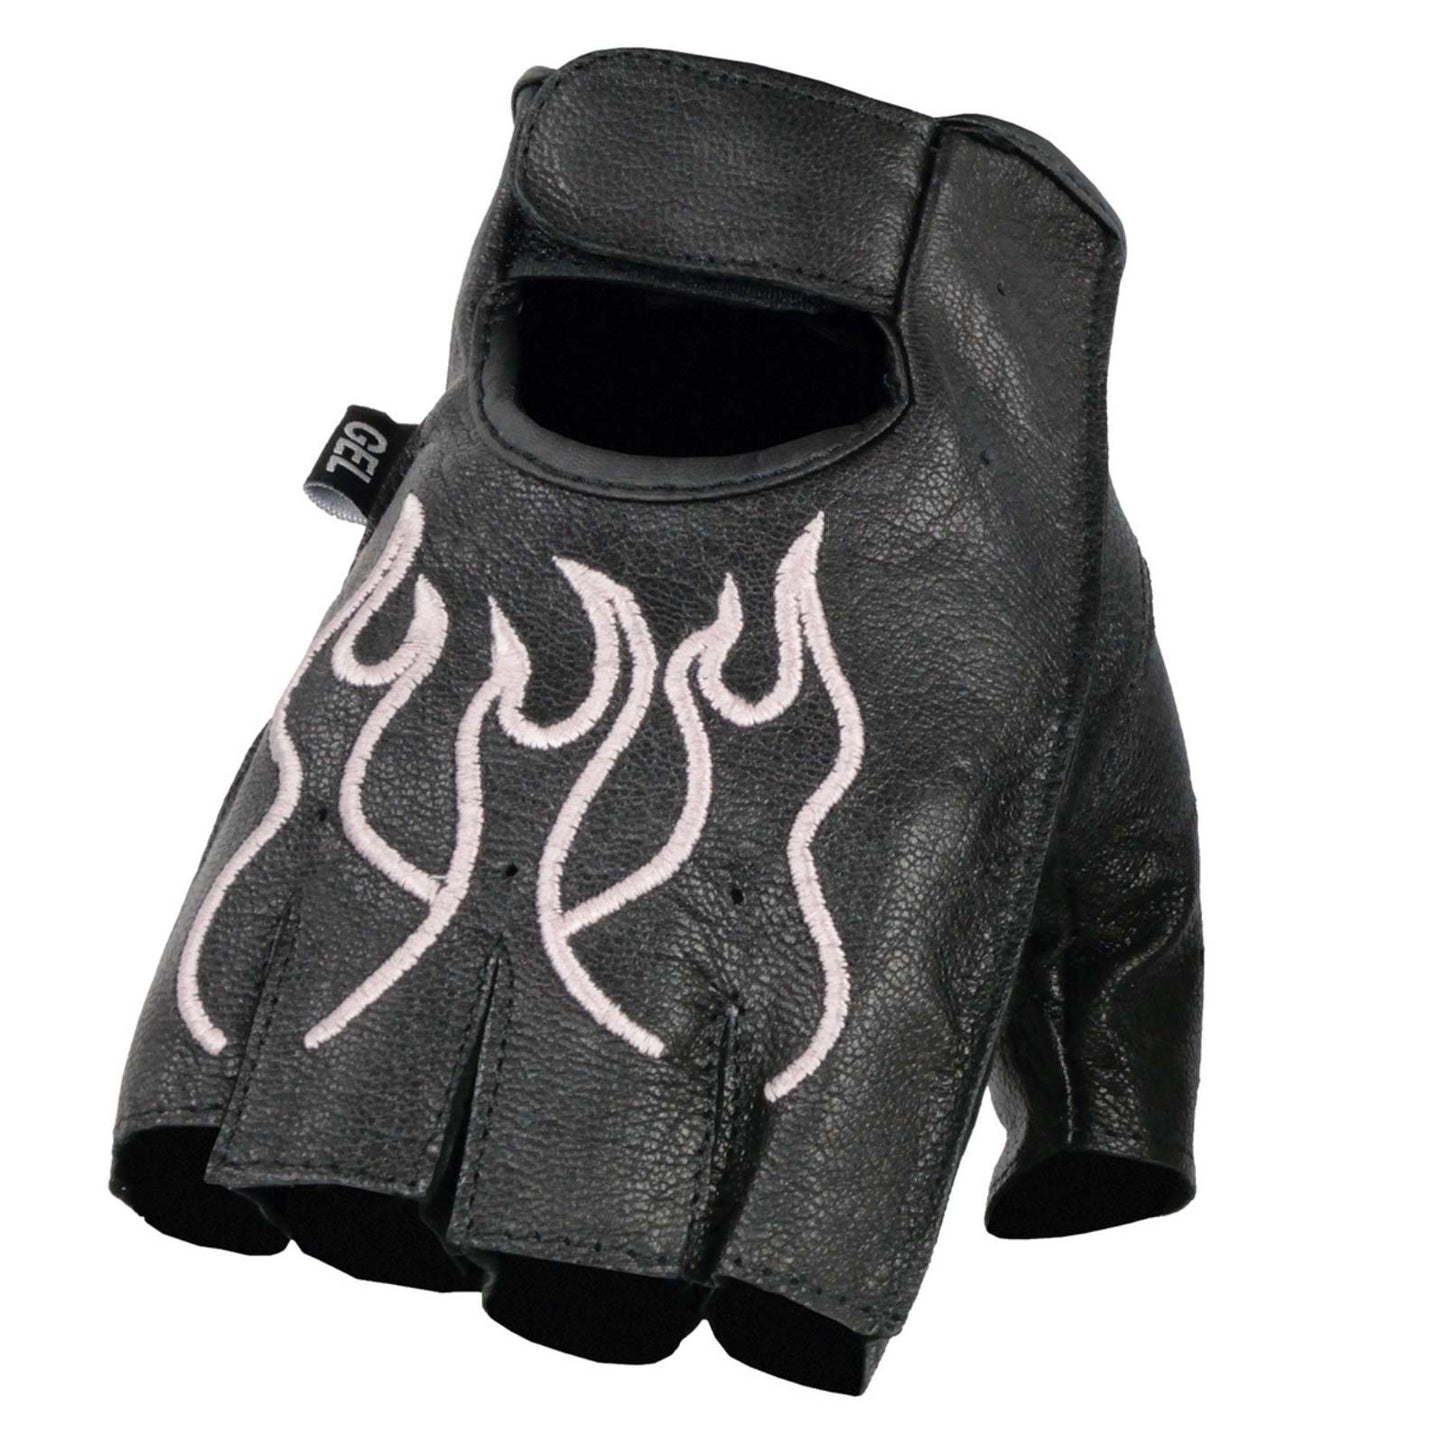 Xelement XG198 Women's Embroidered 'Flamed' Fingerless Black and Pink Motorcycle Leather Gloves